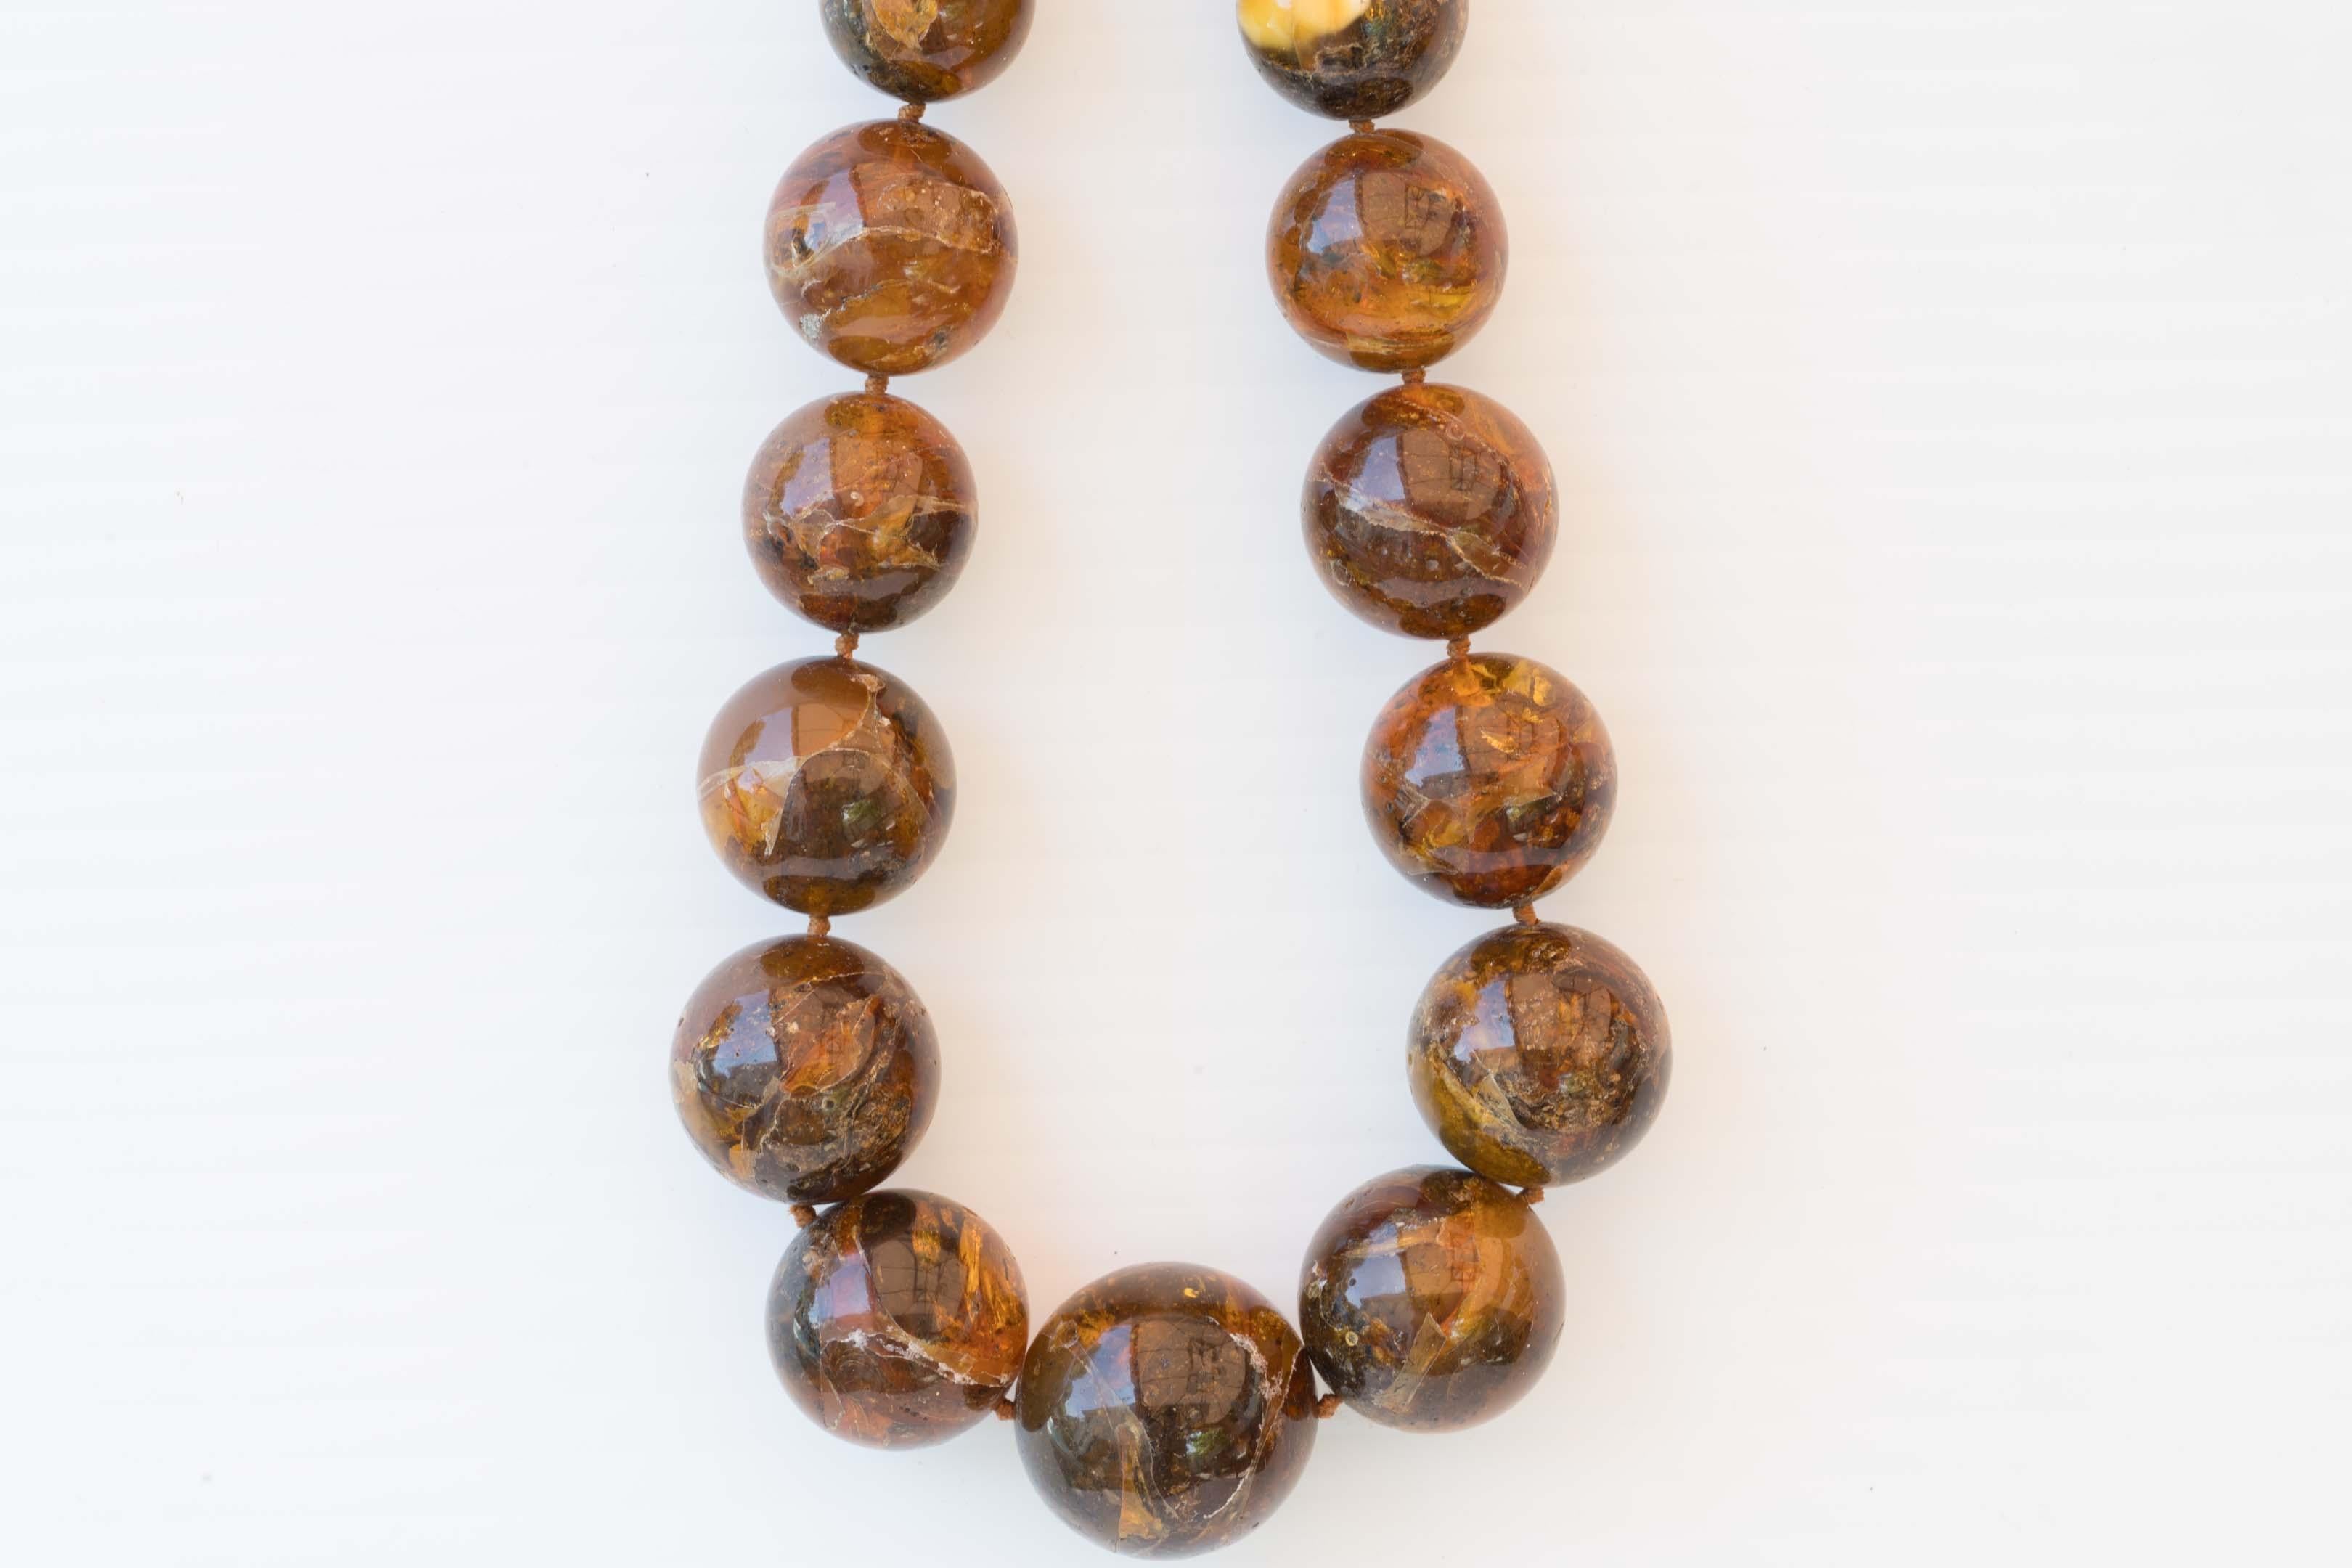 A rare Burmite tribal graduate amber necklace measures 24 inches long with 29 knotted beads measuring 13mm to 27.5 mm in diameter. From clear to reddish and yellow inclusion colour. Signs of wear and natural cracks & imperfections. Made in Burma.